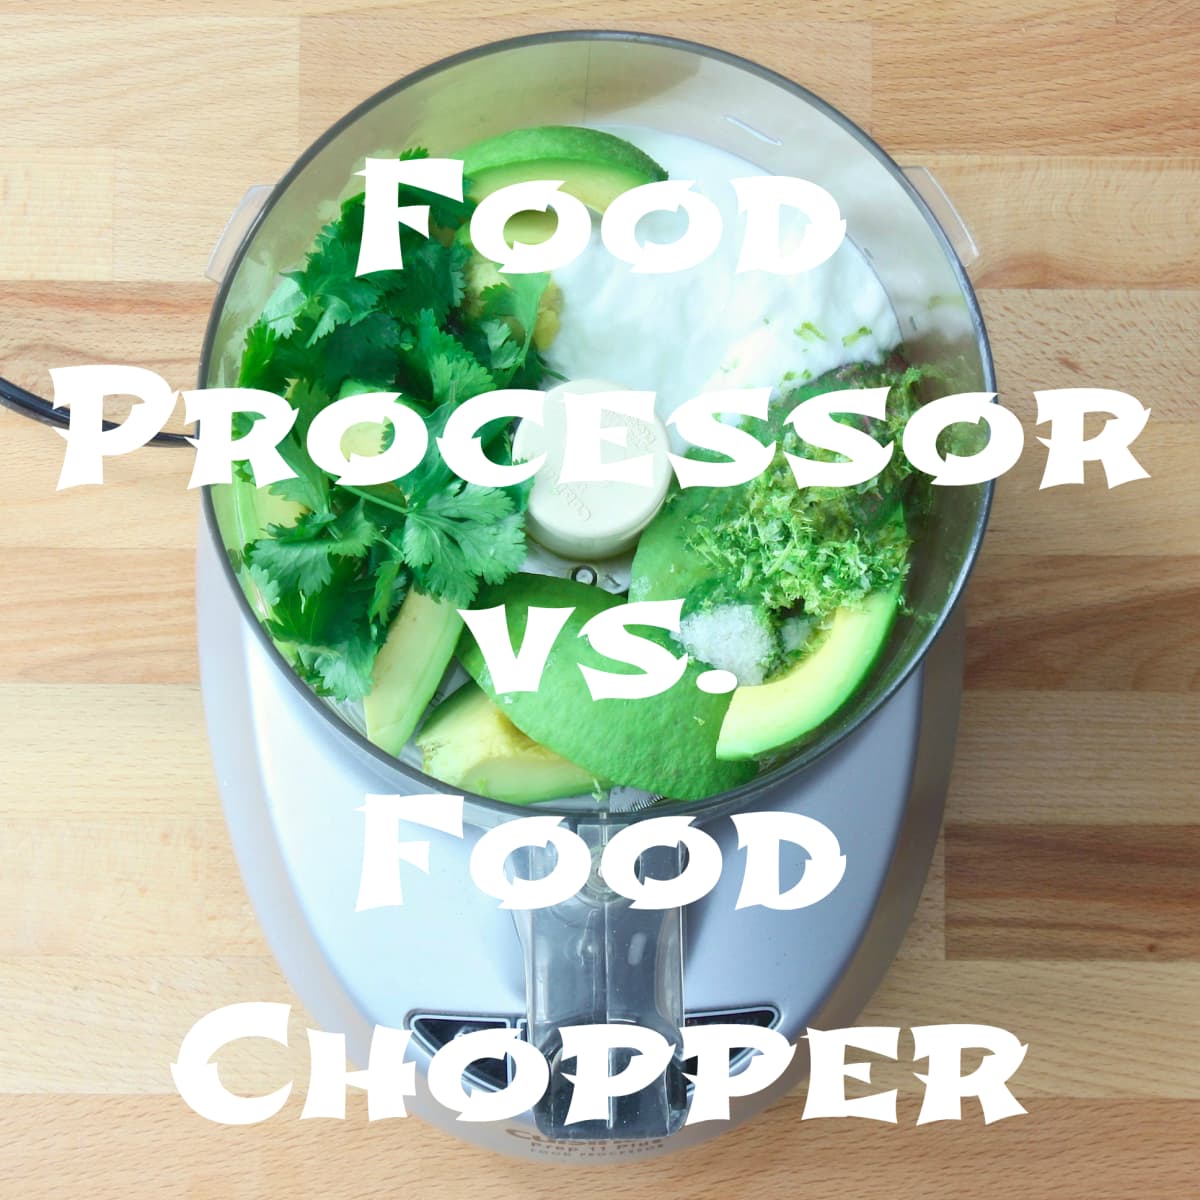 Food Processor vs Chopper vs Blender: What's The Difference?